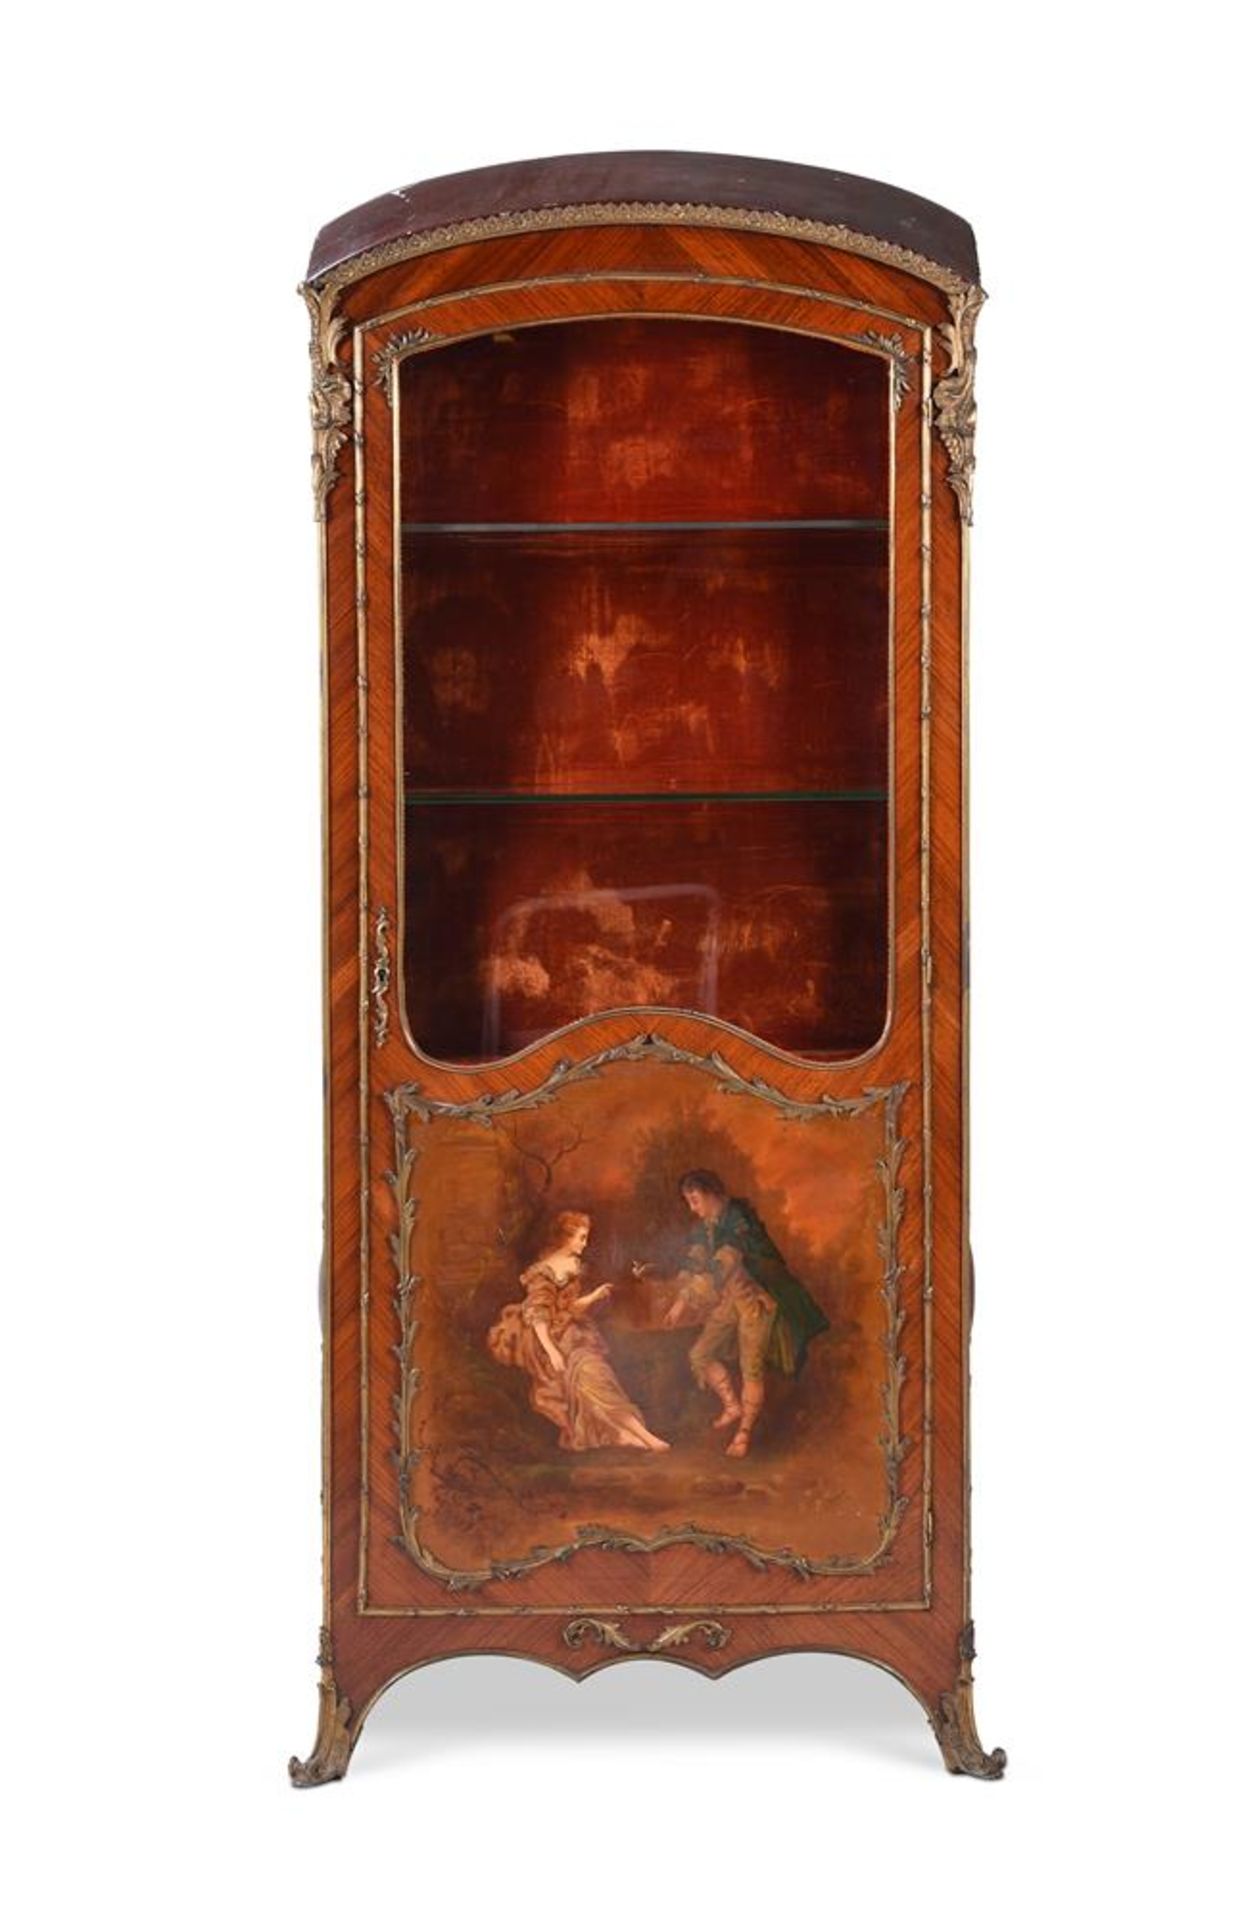 Y A FRENCH KINGWOOD, ORMOLU MOUNTED AND VERNIS MARTIN DISPLAY CABINET, THIRD QUARTER 19TH CENTURY - Image 2 of 7